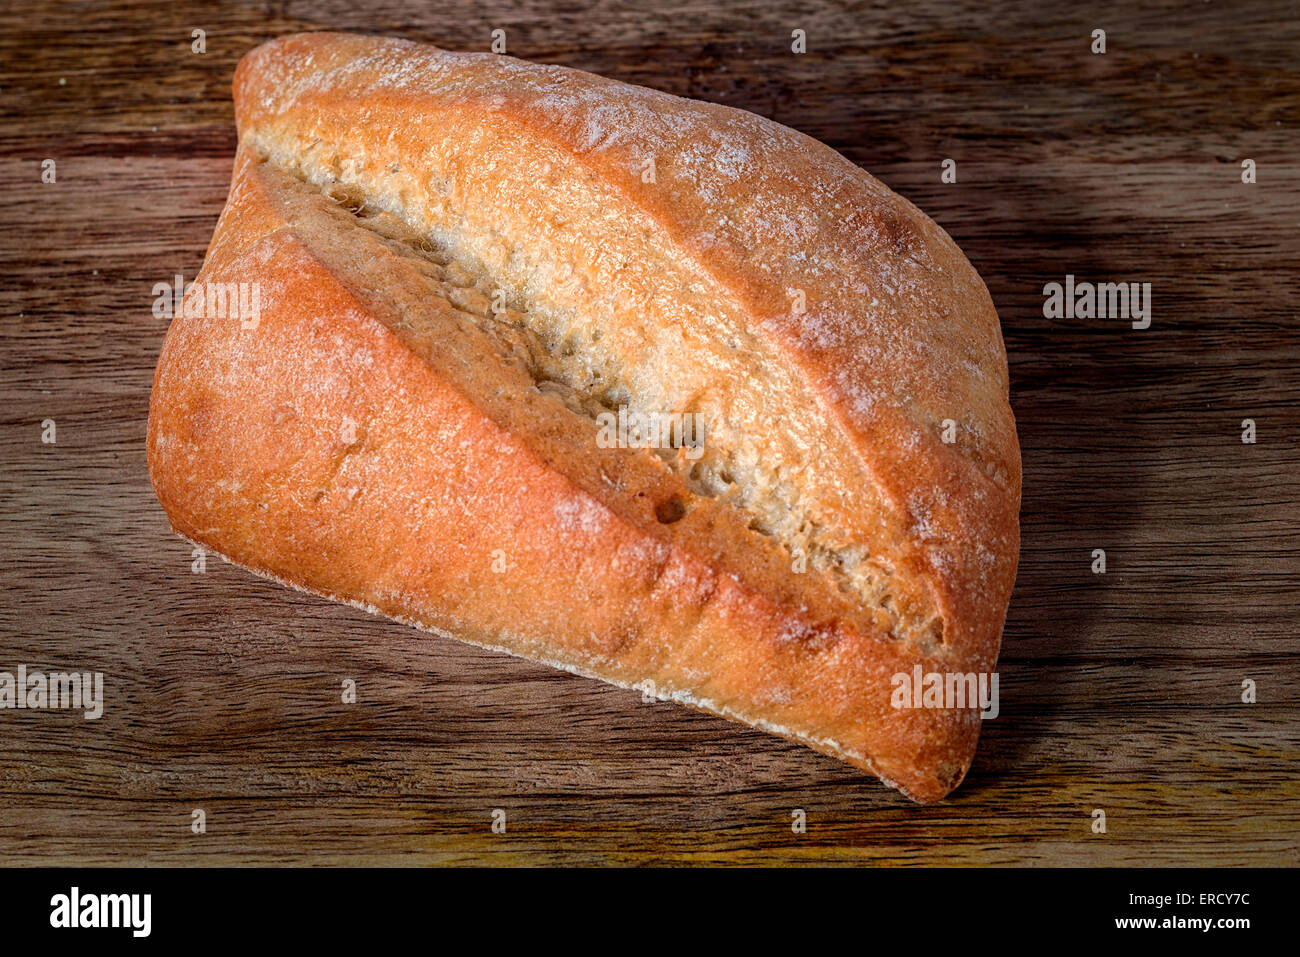 bread isolated on wooden table Stock Photo